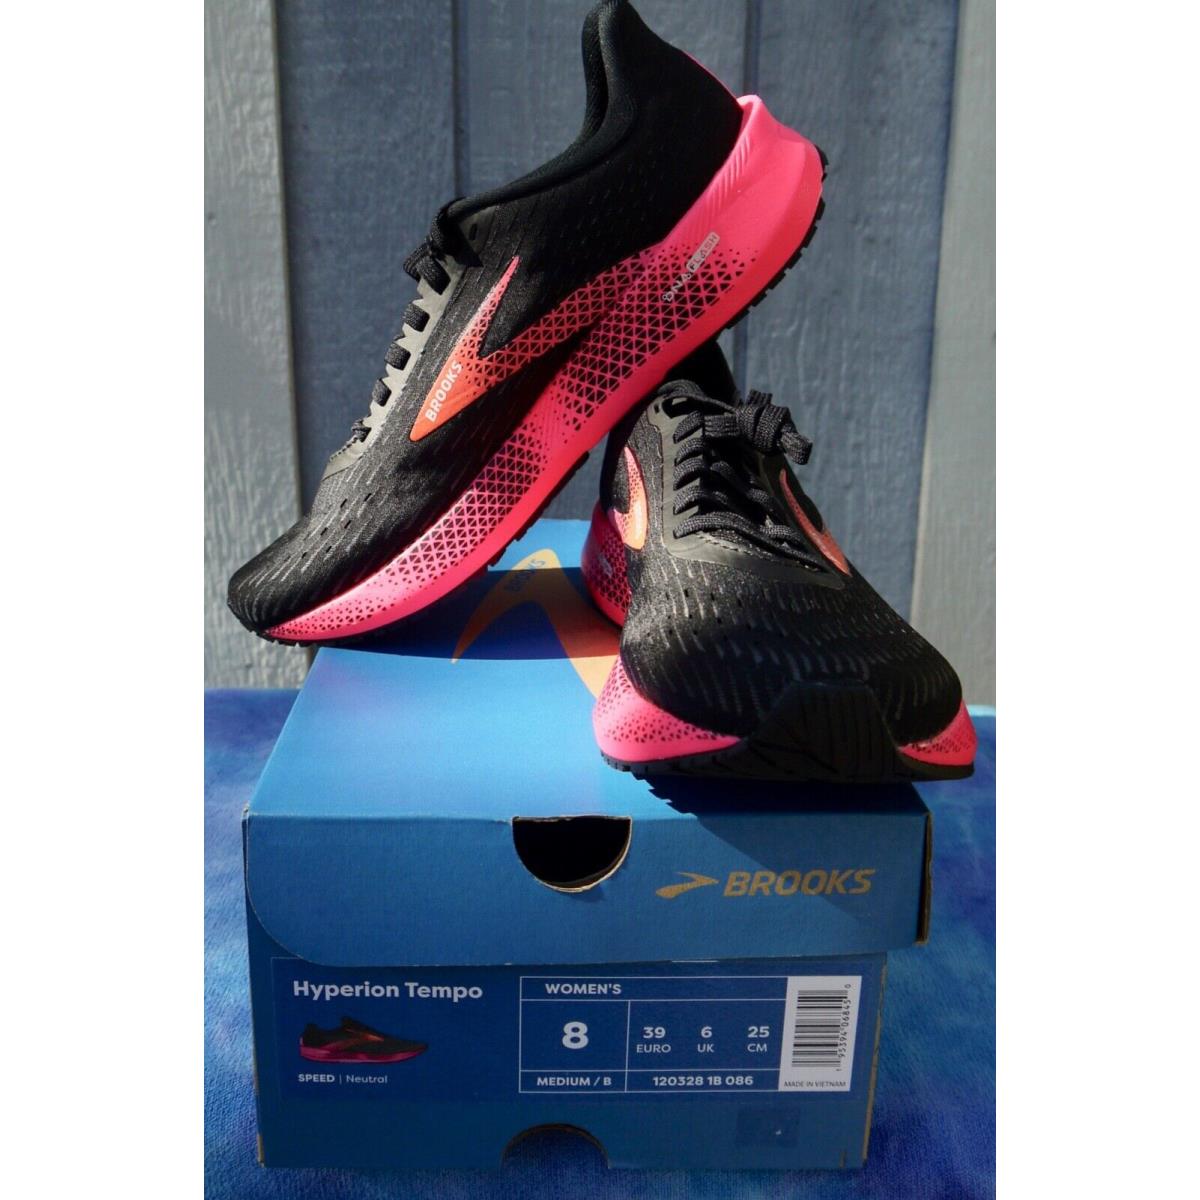 Brooks Hyperion Tempo 120328-1B-086 Women`s Black/pink Road Running Shoes